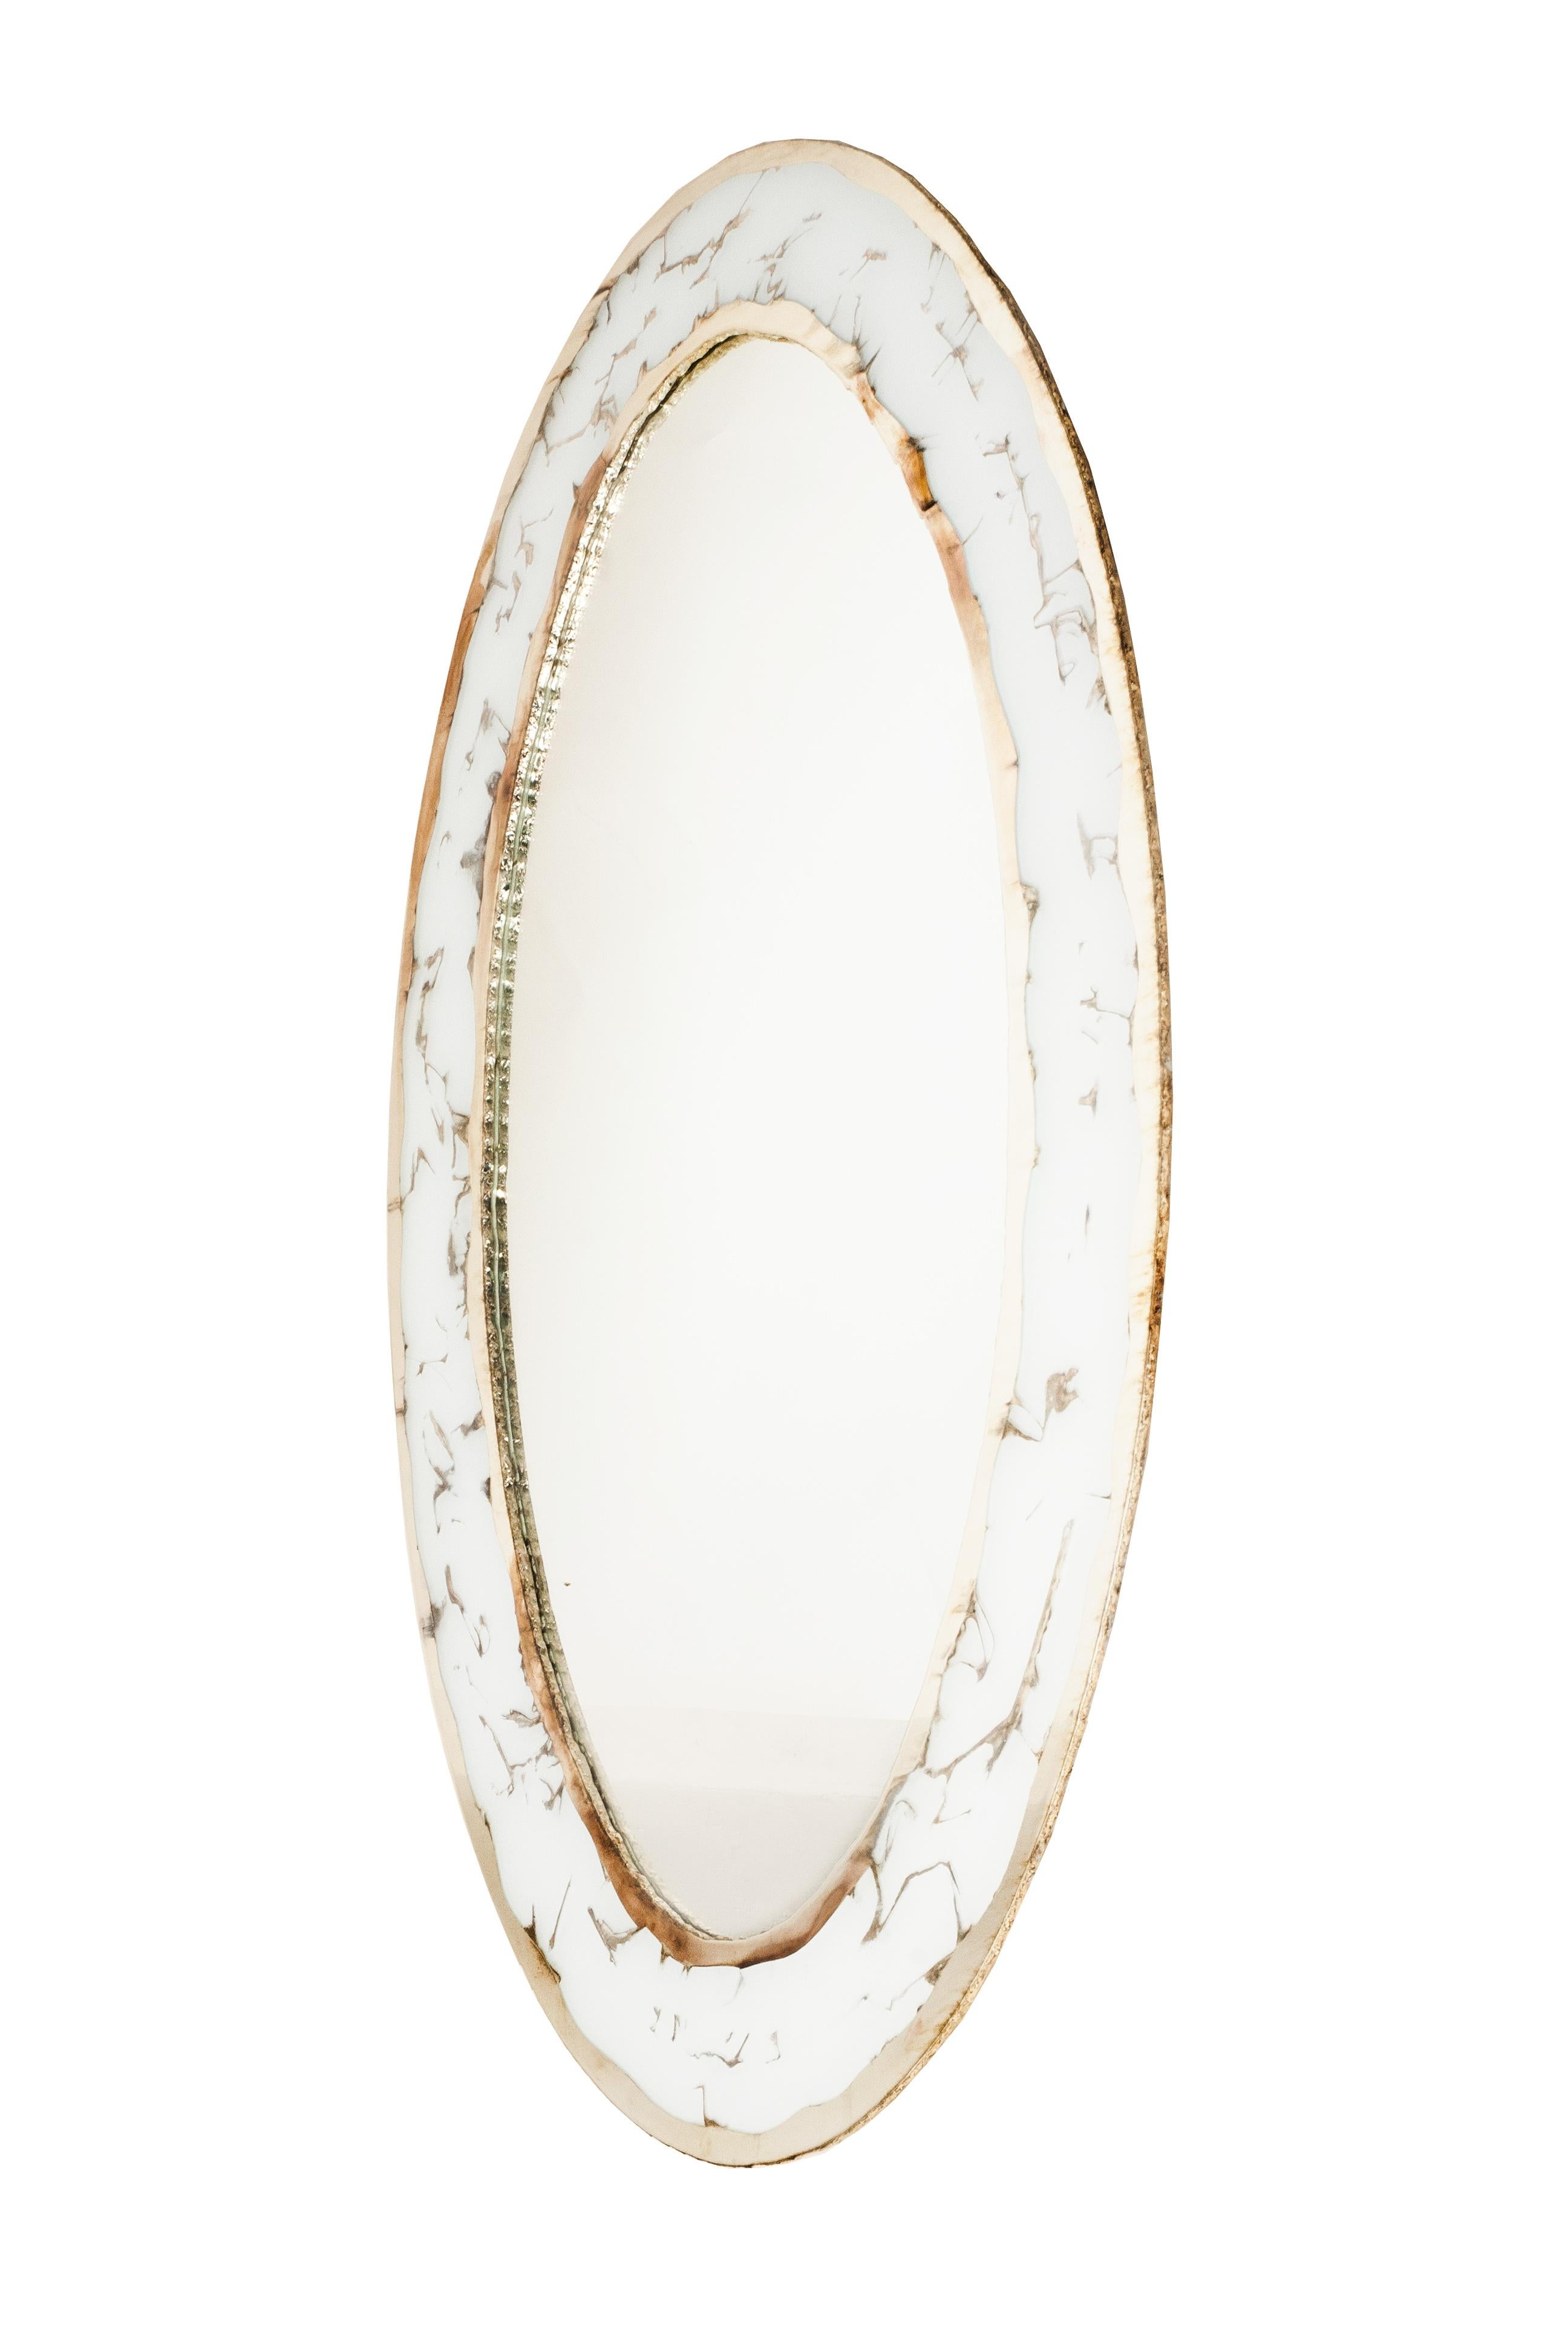 Stunning now, stunning forever. Crafted to stand the test of time, our Life mirror becomes family heirloom for future generations that can be passed down and cherished for years to come.
 
Inspired by the life's birth, this oval or round shaped  art